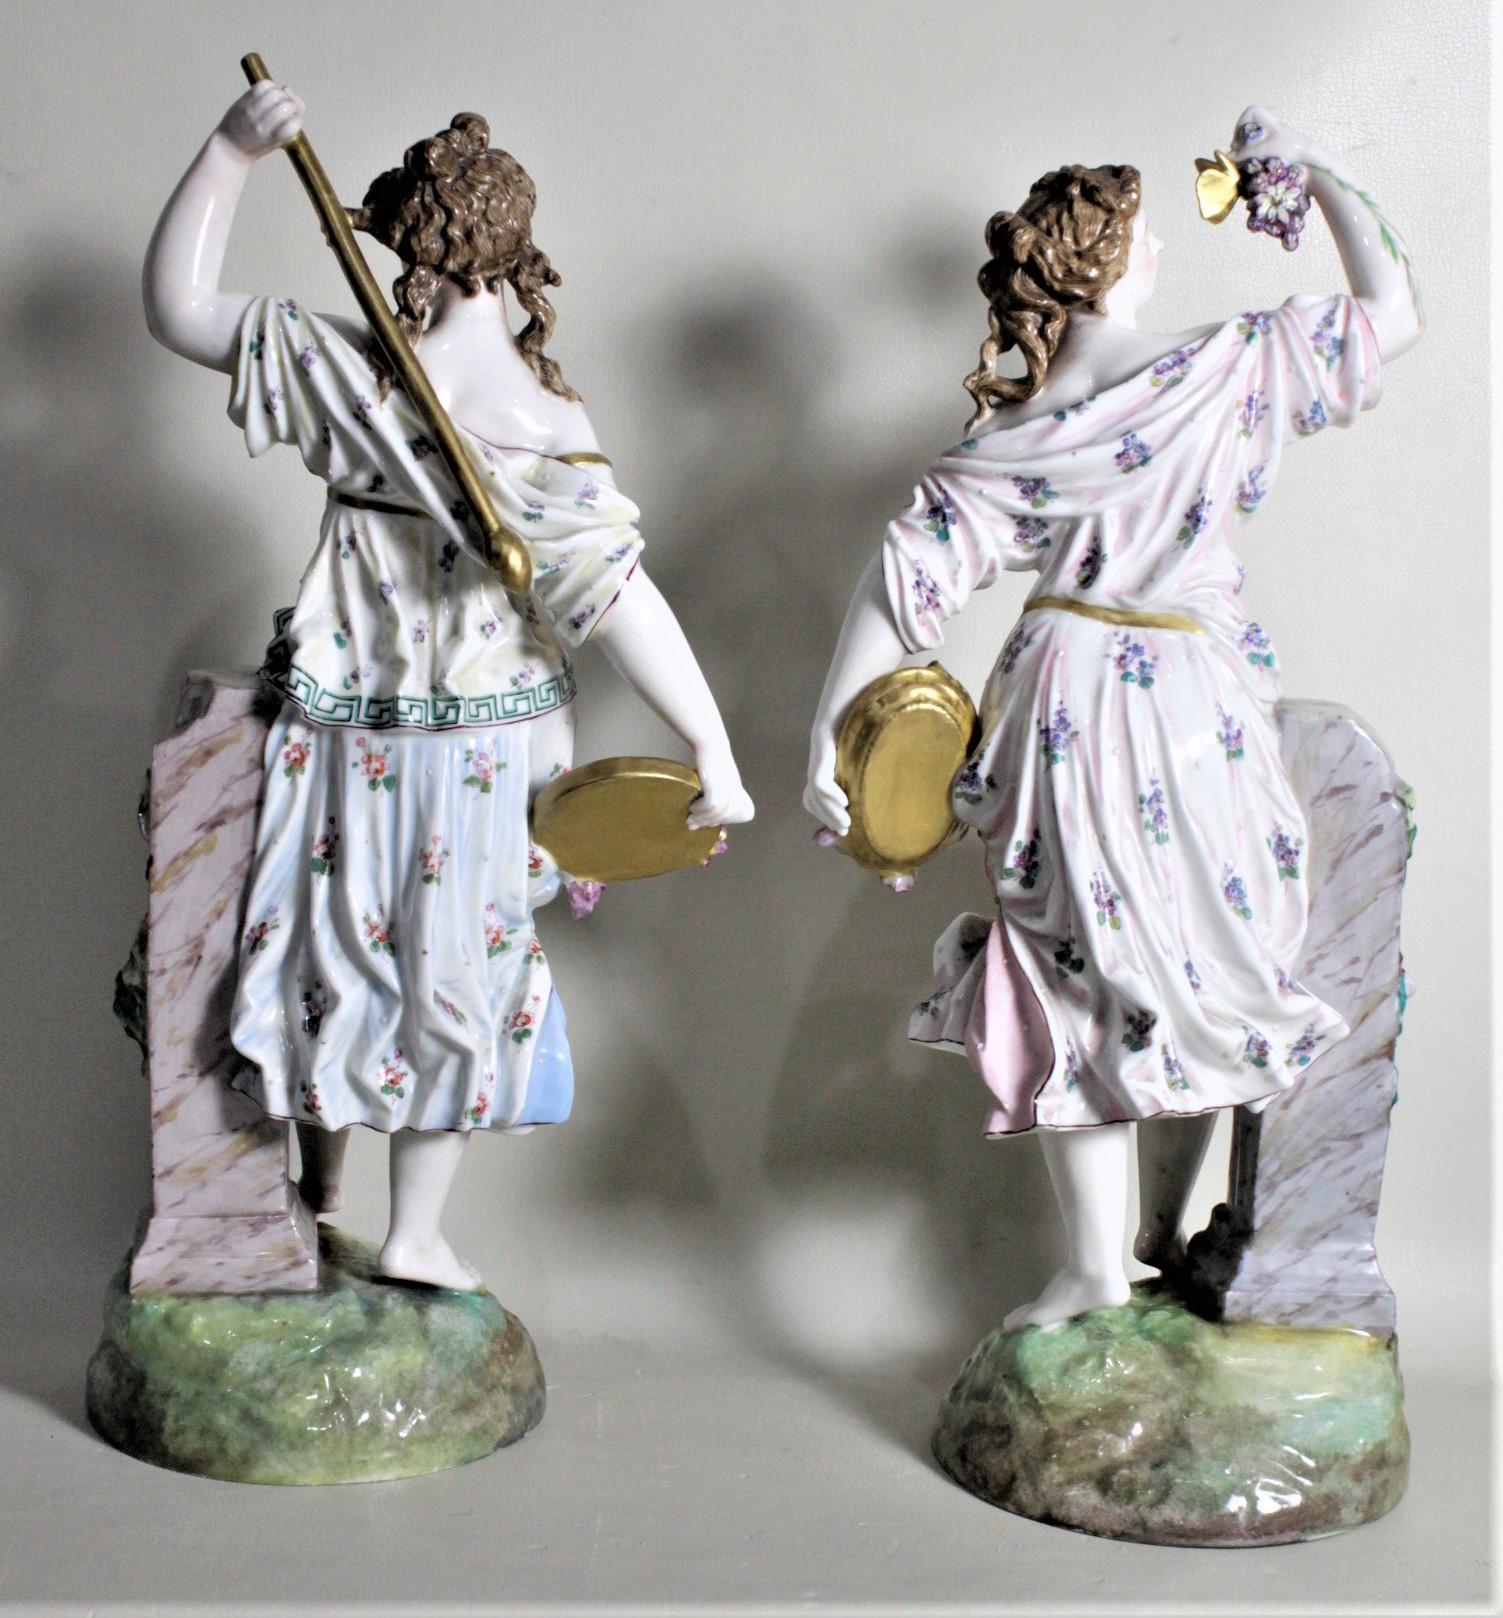 Pair of Antique German or Austrian Porcelain Female Figurines Harvesting Grapes In Good Condition For Sale In Hamilton, Ontario